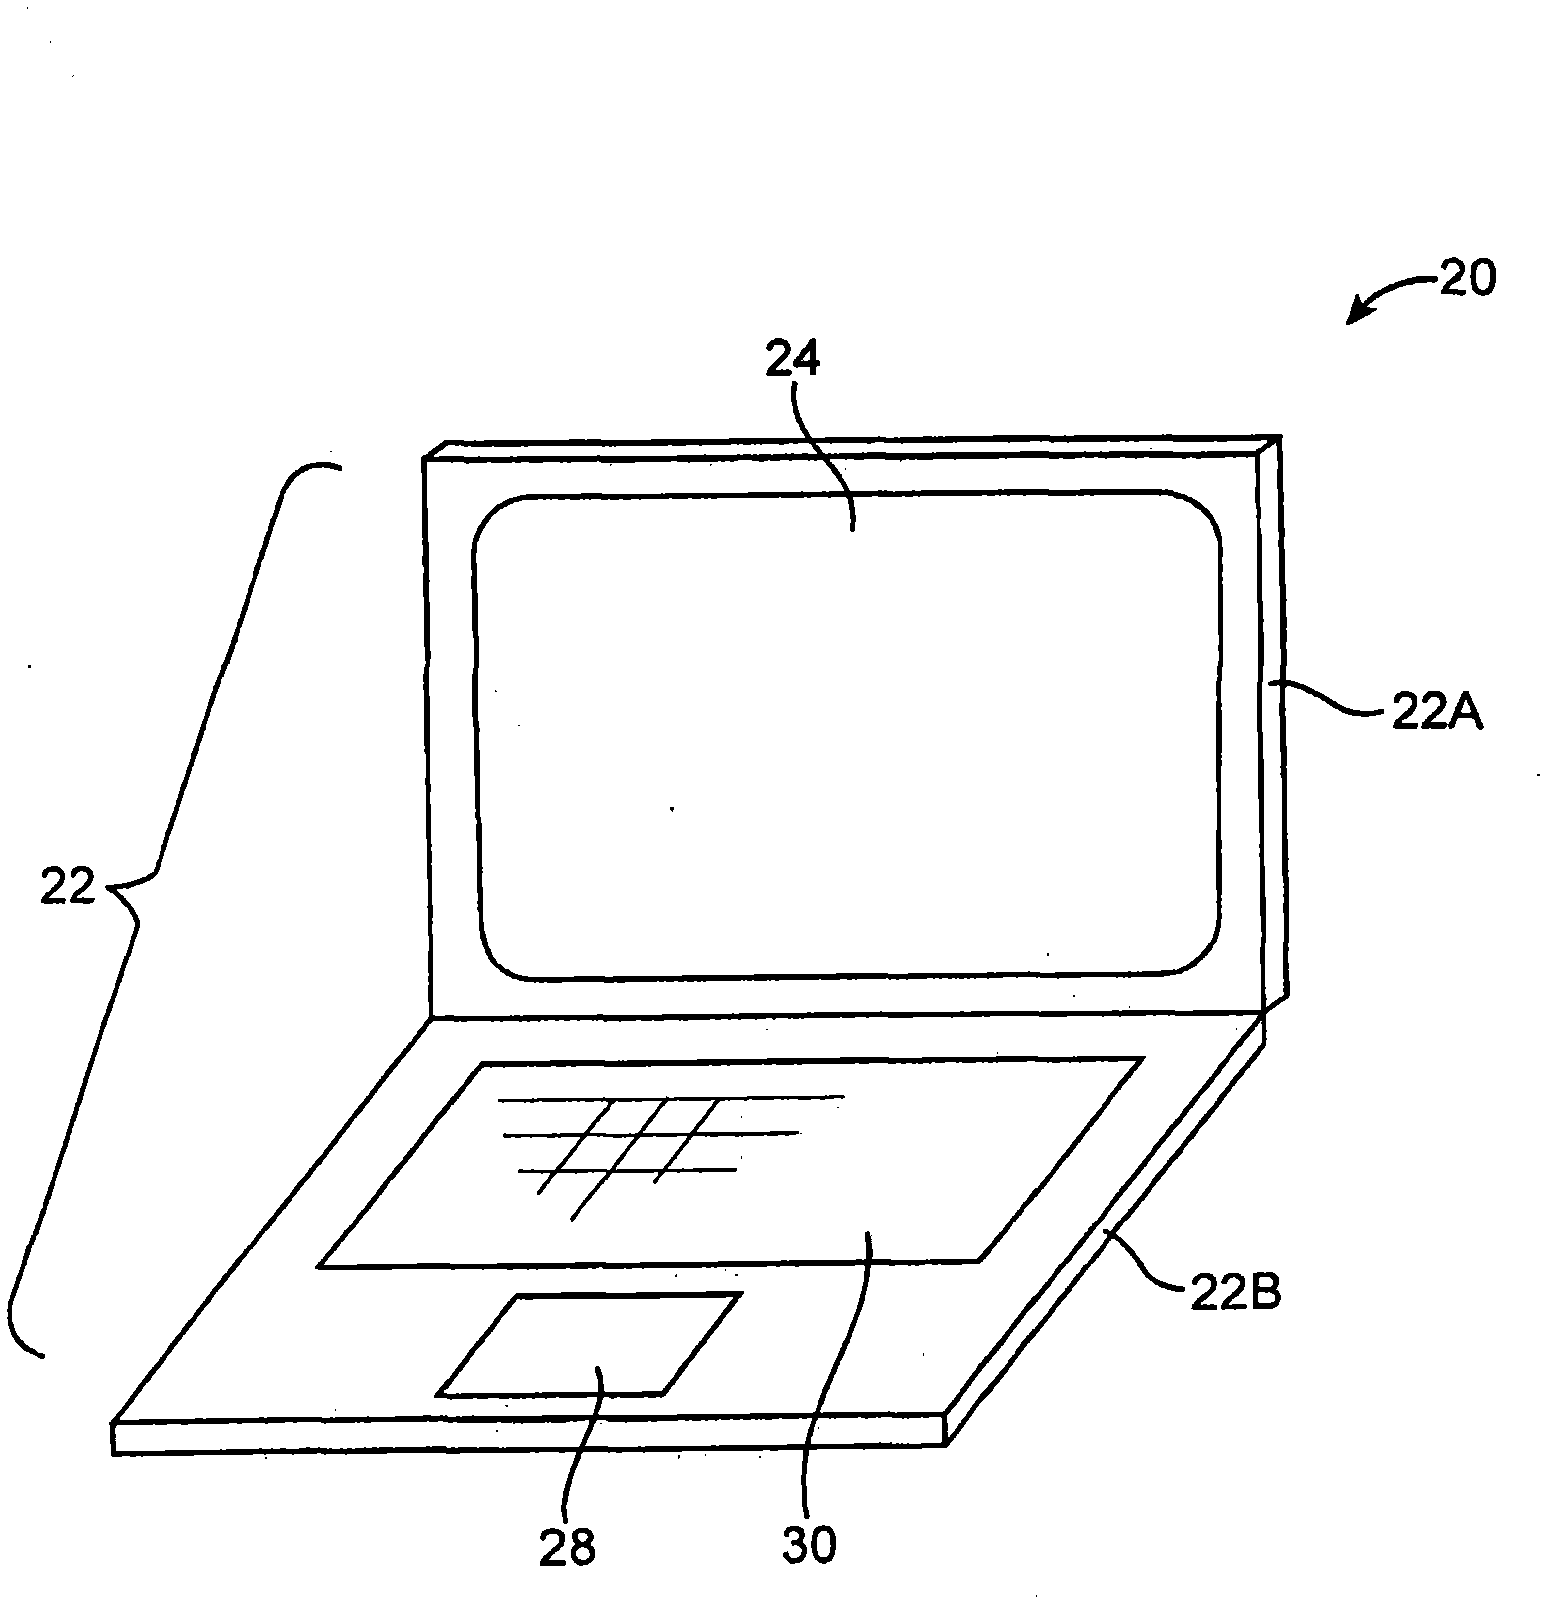 Laser processing of display components for electronic devices